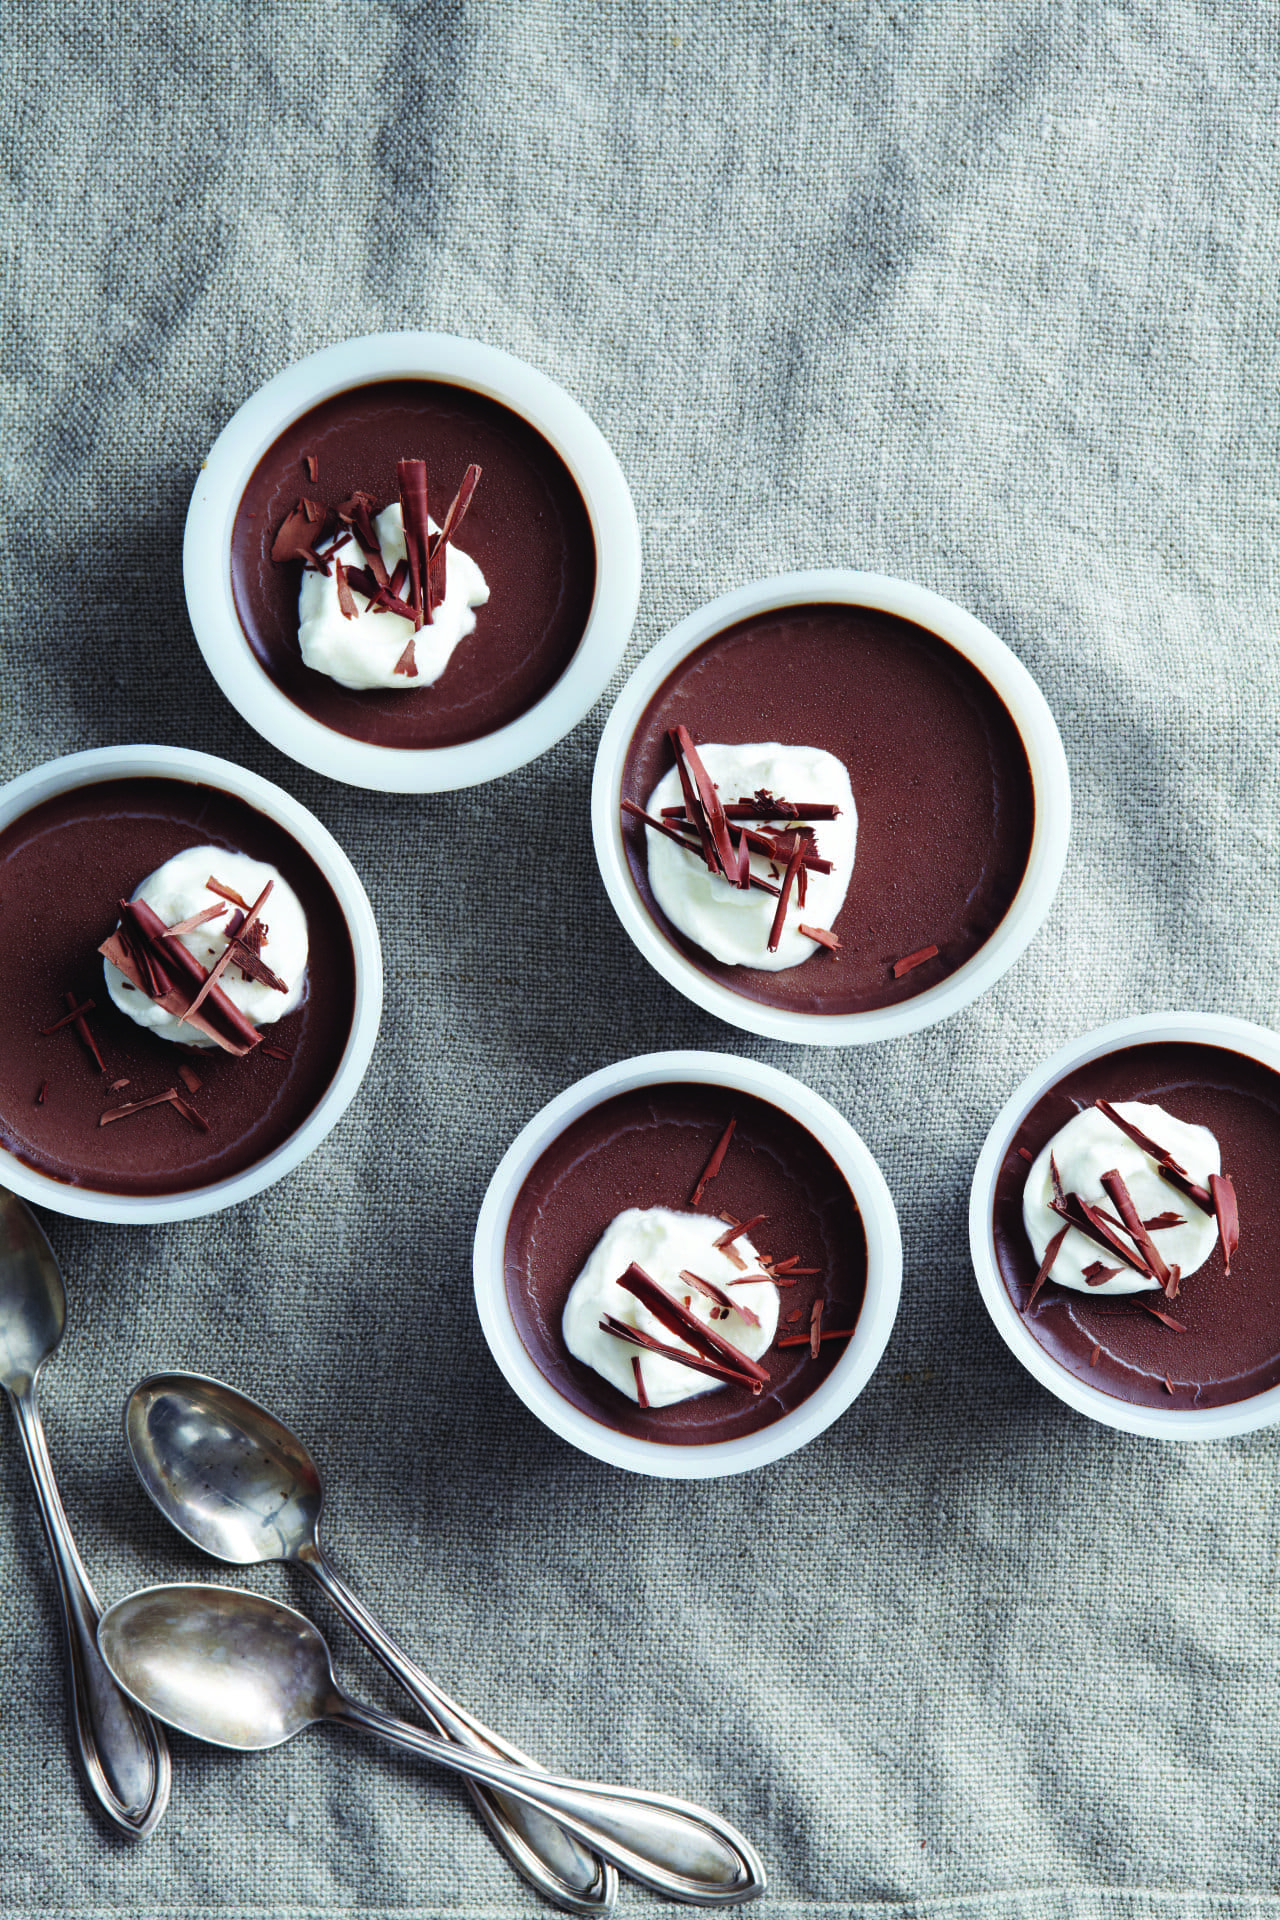 Joanne Chang's bittersweet chocolate pots de crème, which is featured in her latest cookbook, "Baking with Less Sugar." (Courtesy Joseph De Leo)